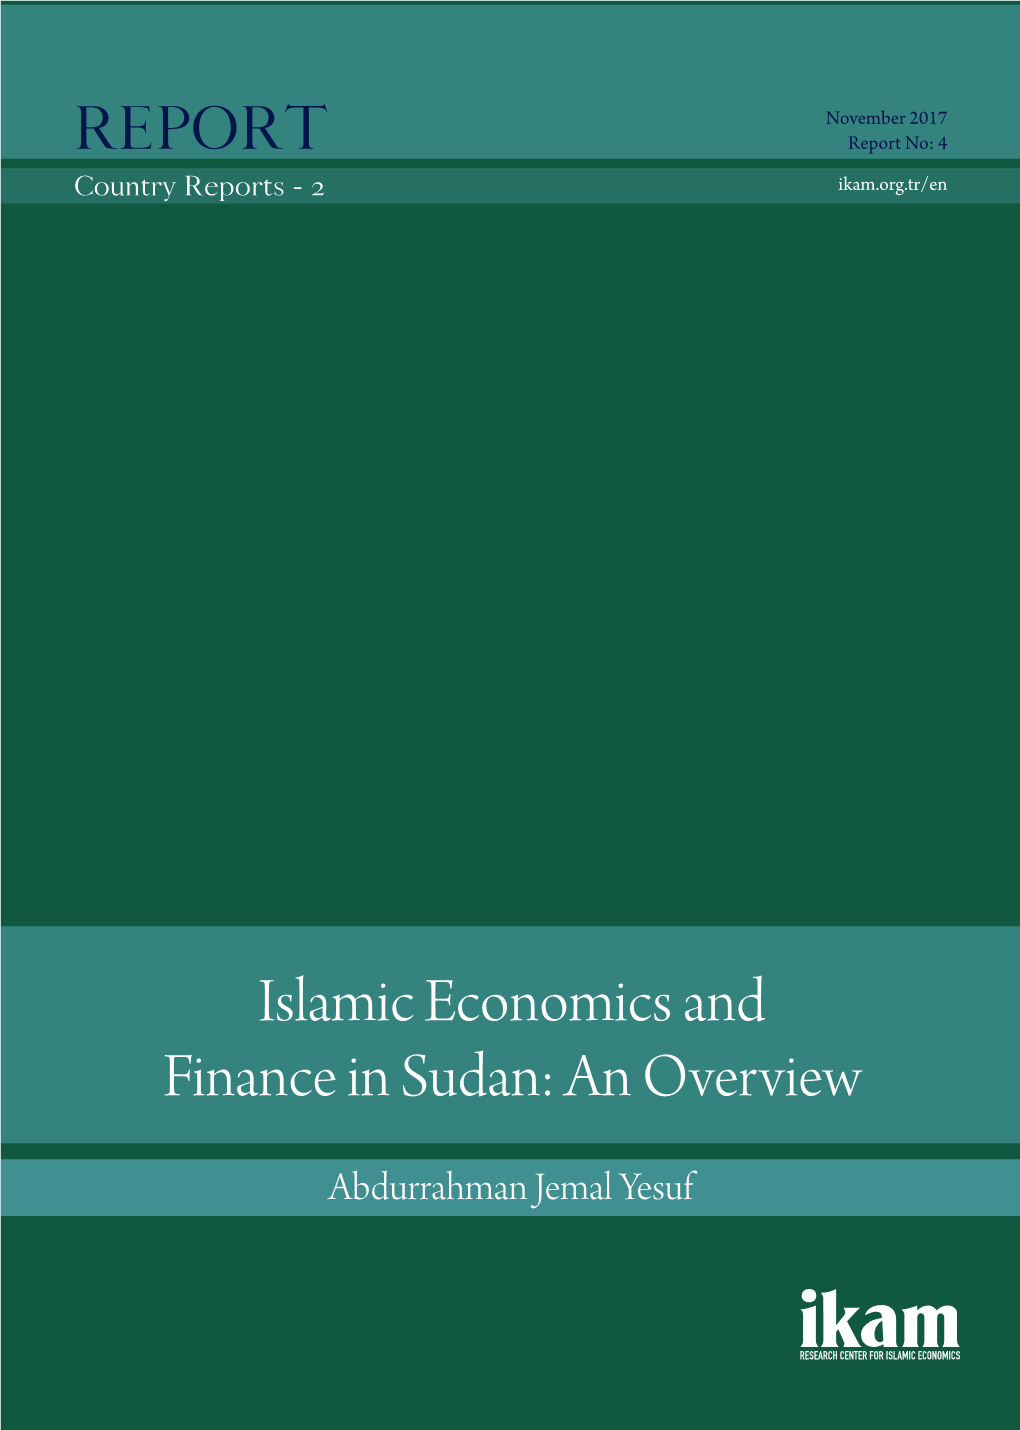 Islamic Economics and Finance in Sudan: an Overview November 2017 REPORT Report No: 4 Country Reports - 2 Ikam.Org.Tr/En